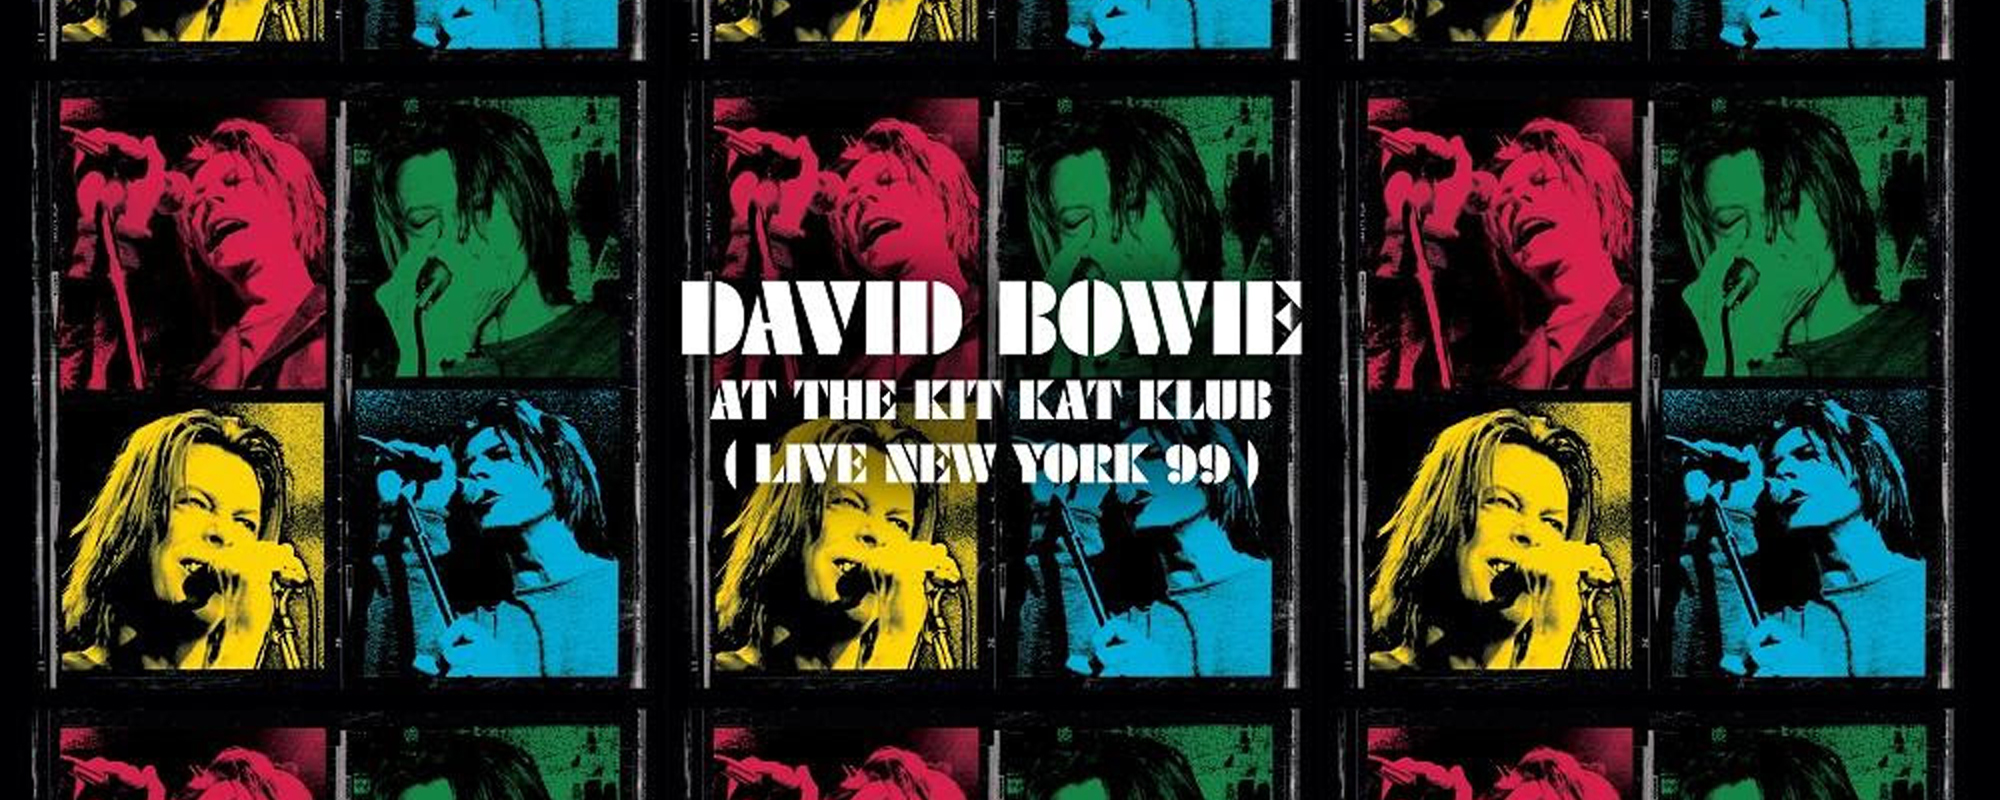 Review: More Live Bowie? Bring It On….